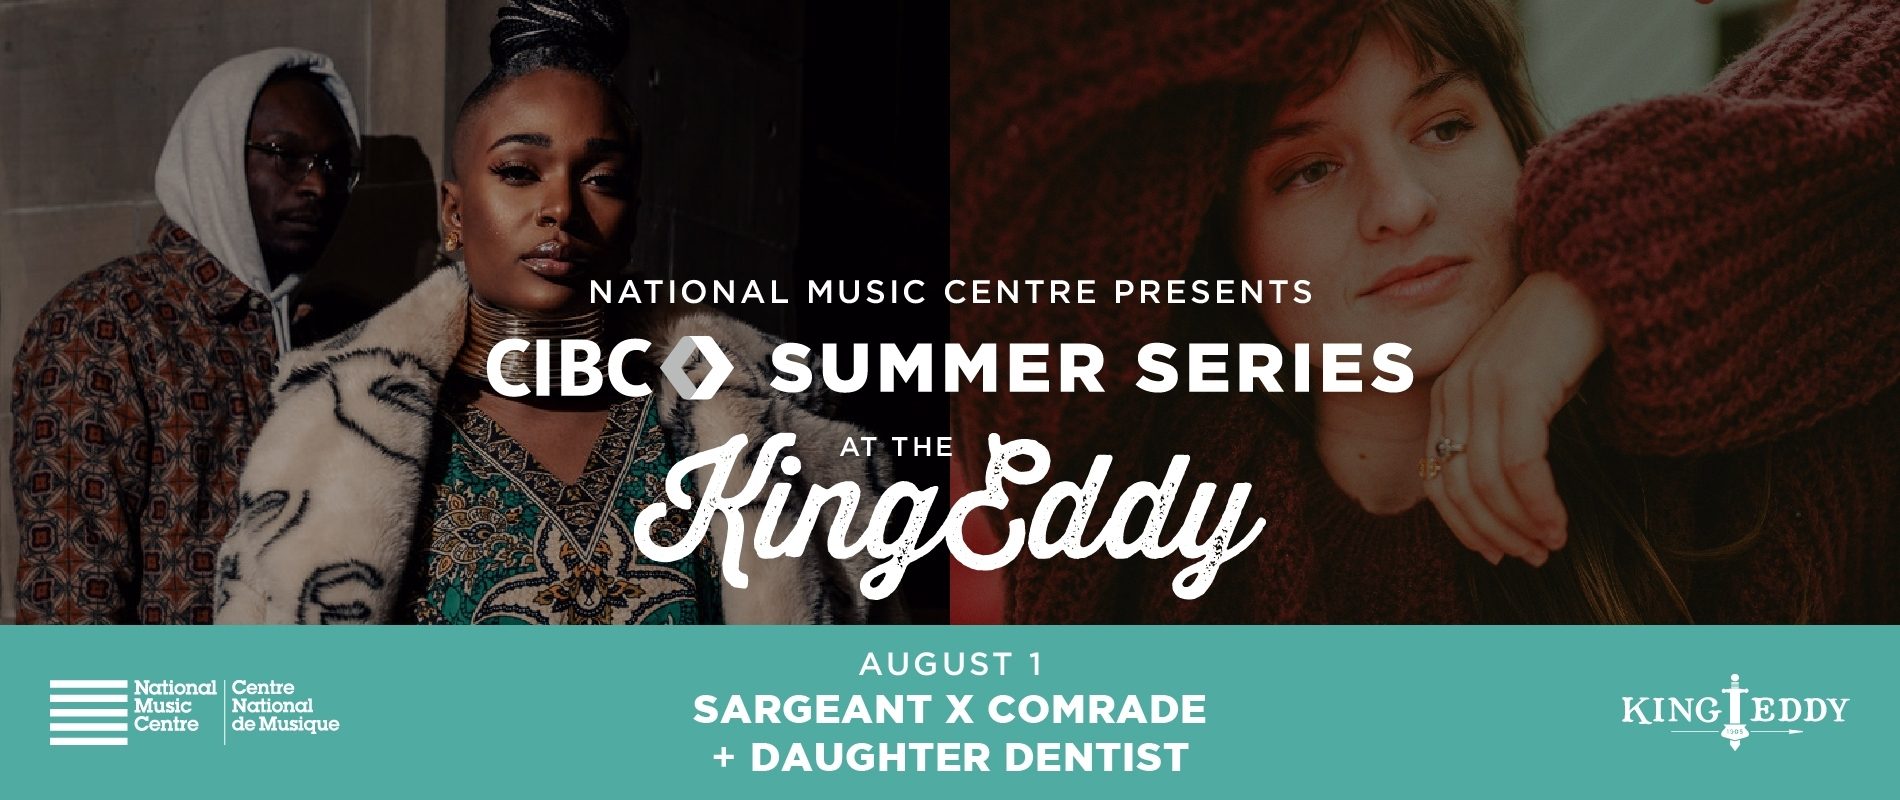 NMC Presents: CIBC Summer Series at the King Eddy — Sargeant X Comrade with Daughter Dentist